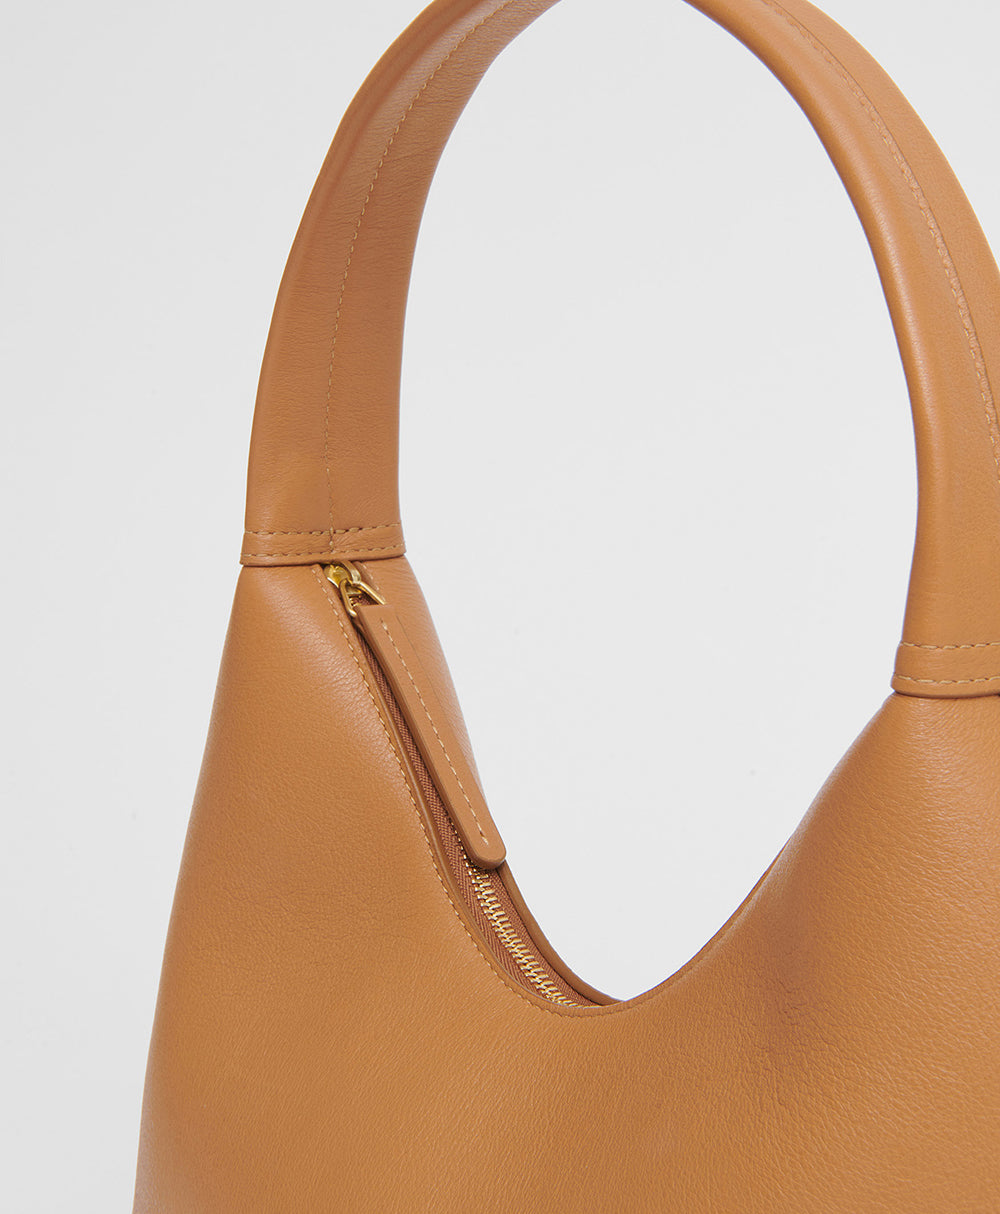 Luxury Leather Tote Bag | Cotton Candy